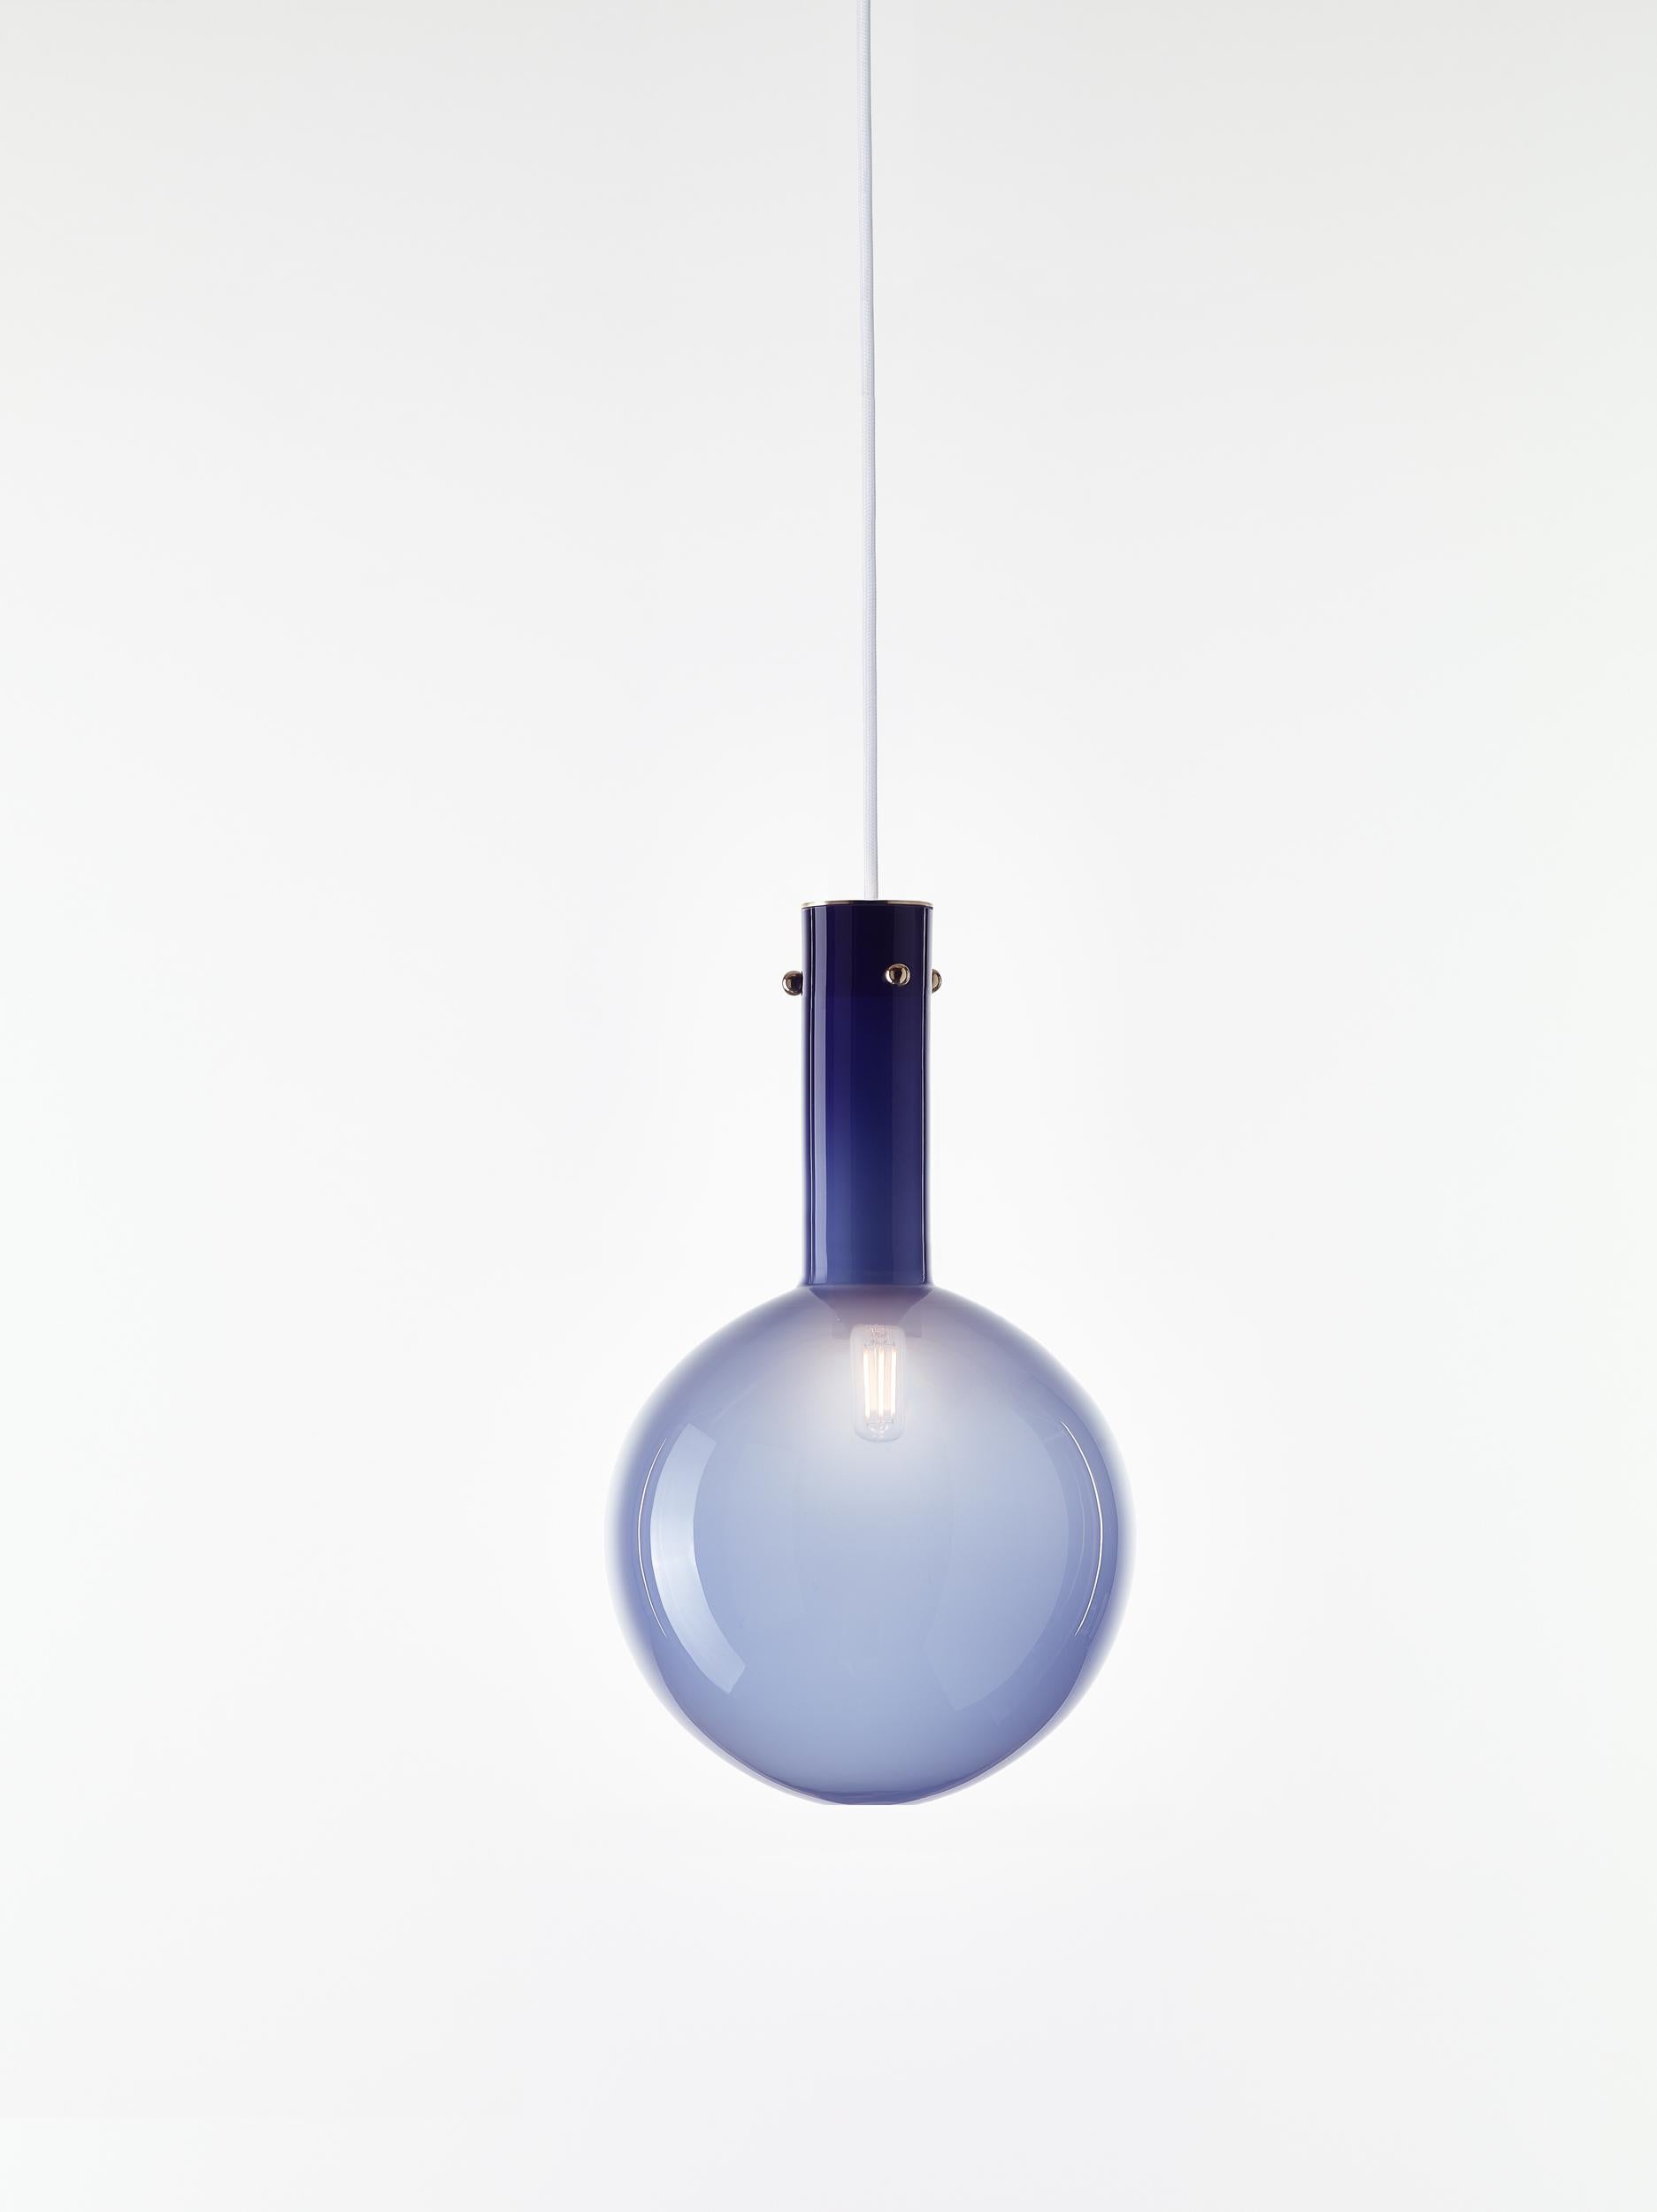 Set of 2 Blue Sphaerae Pendant Lights by Dechem Studio
Dimensions: D 20 x H 180 cm
Materials: Brass, Metal, Glass.
Also Available: Different finishes and colours available.

Only one homogenous piece of hand-blown glass creates the main body of